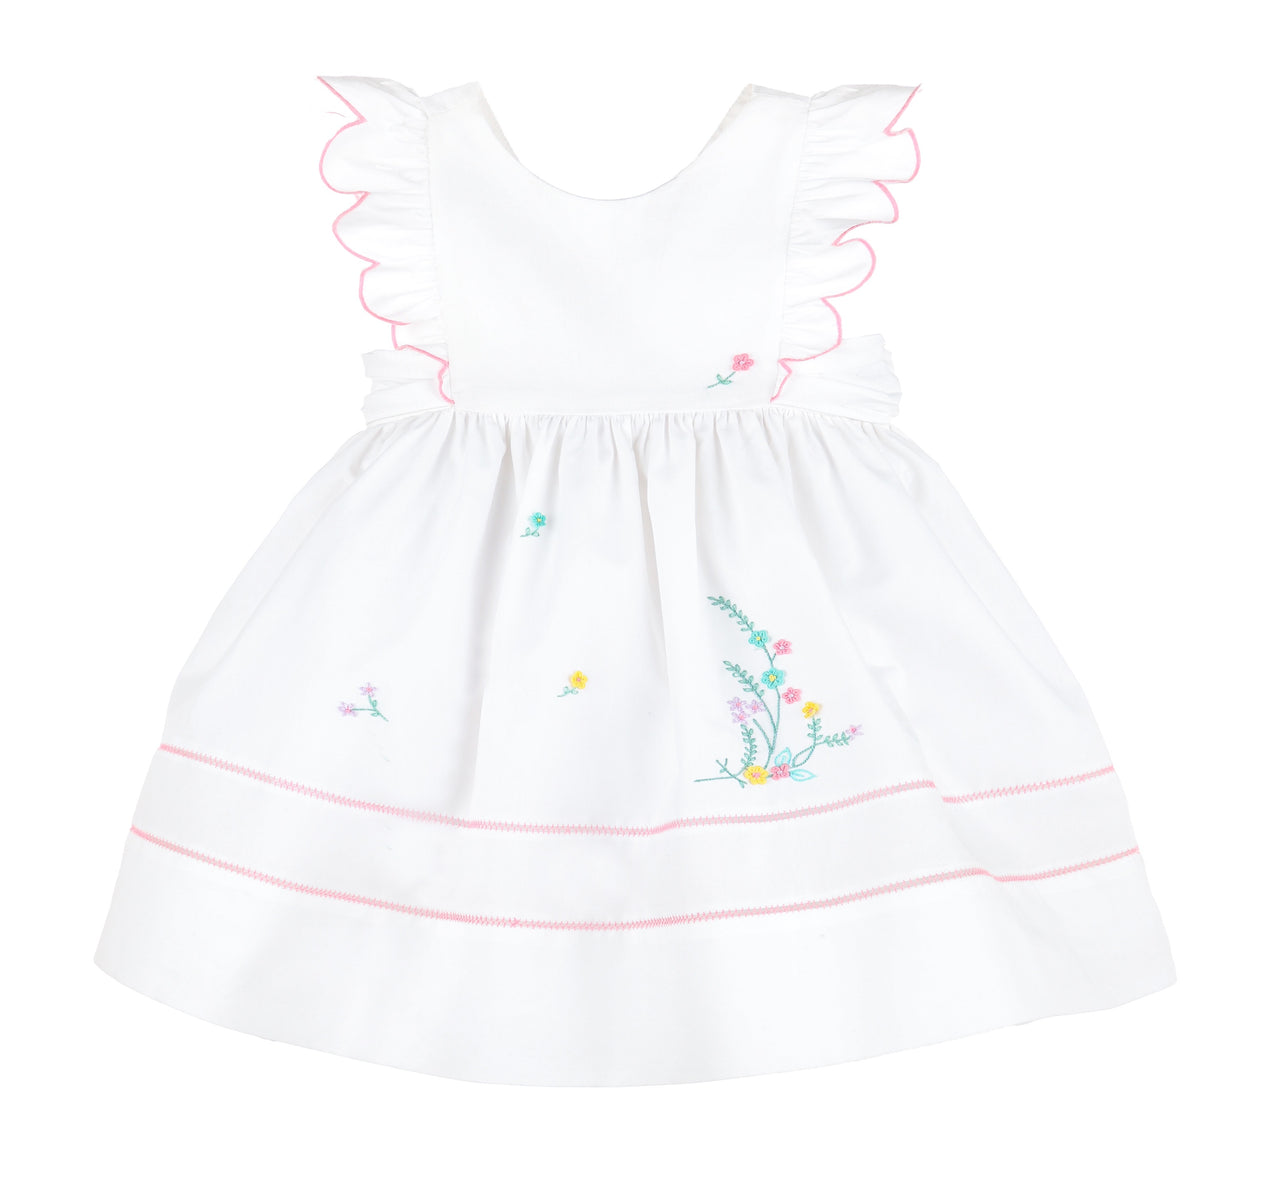 Sophie & Lucas Broderie Dress White SL3637-WH 5011